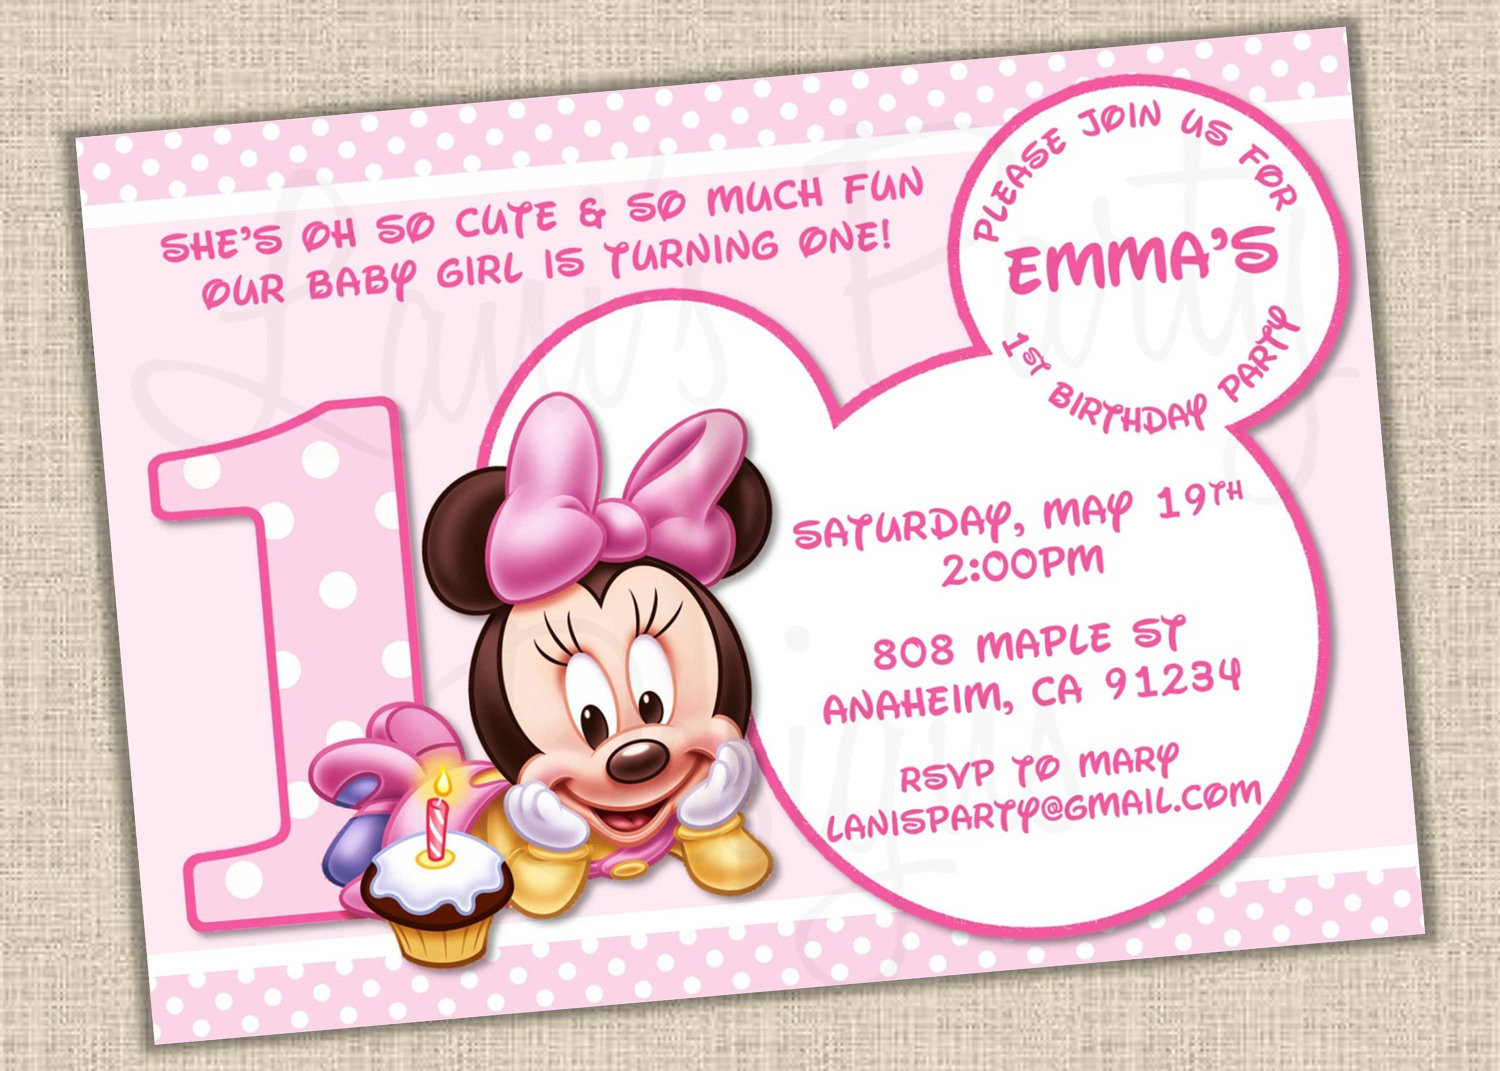 Baby Minnie Mouse 1st Birthday Invitations
 Baby Minnie Mouse 1st Birthday Invitations